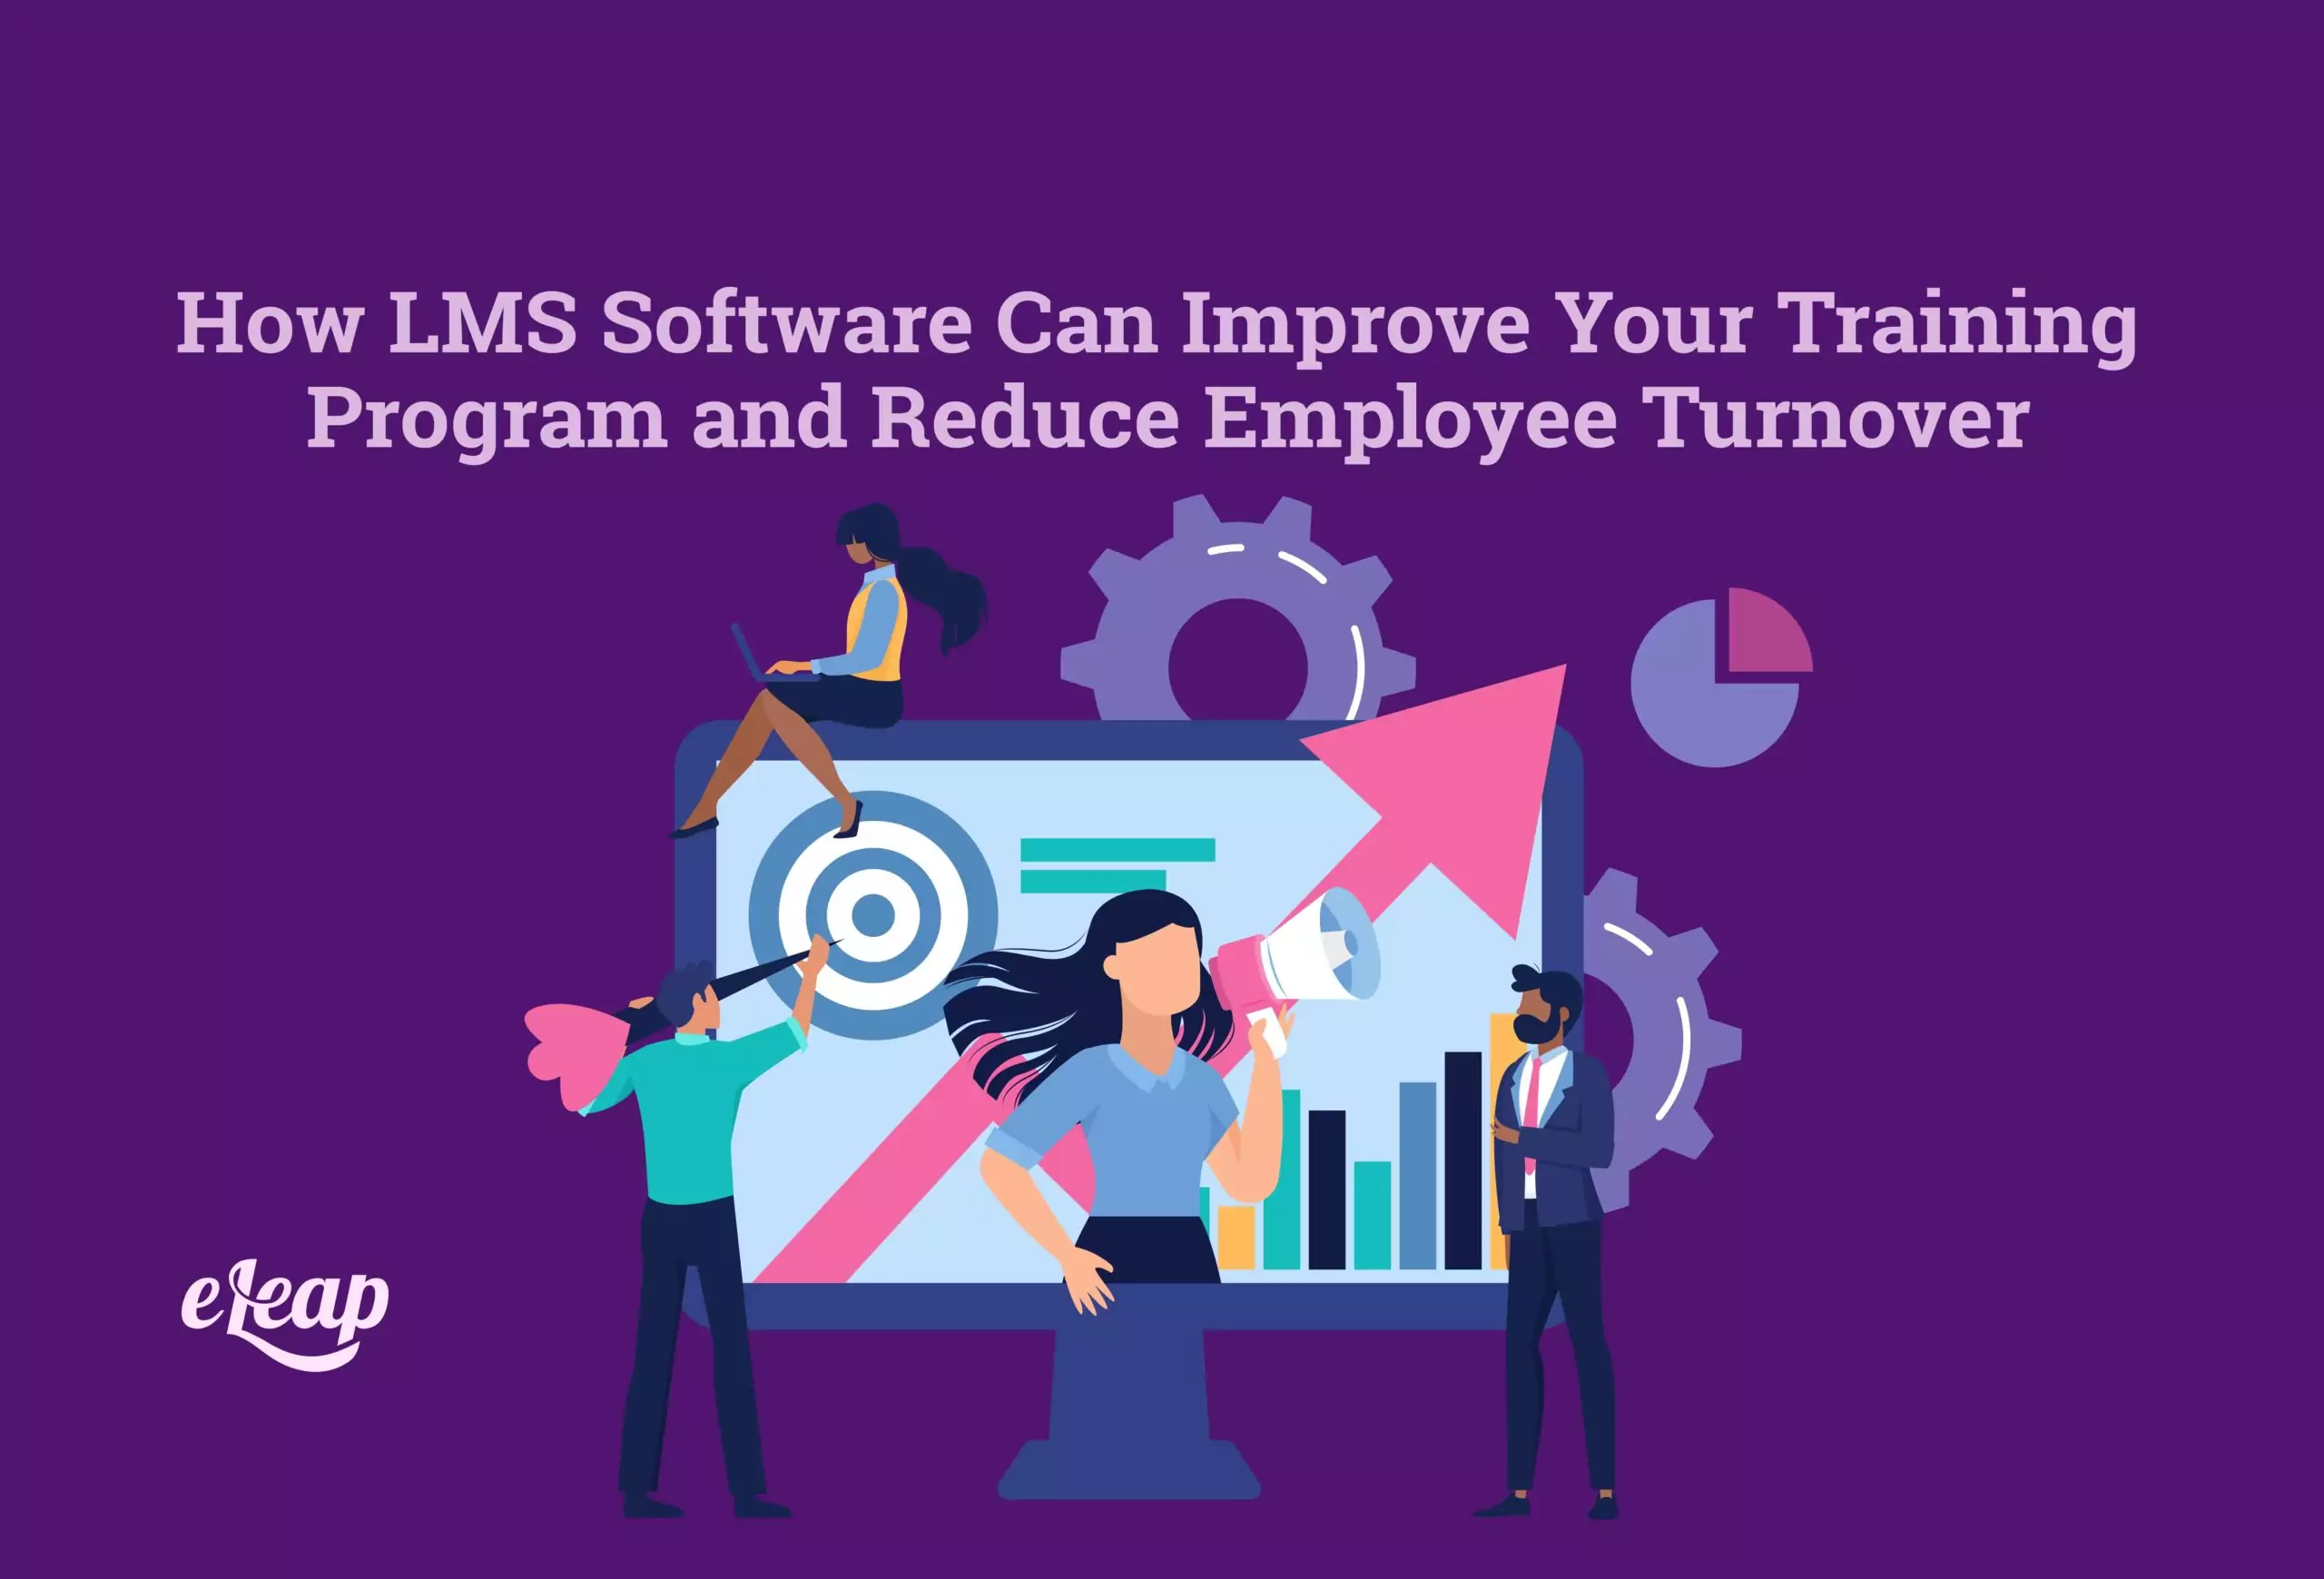 How LMS Software Can Improve Your Training Program and Reduce Employee Turnover